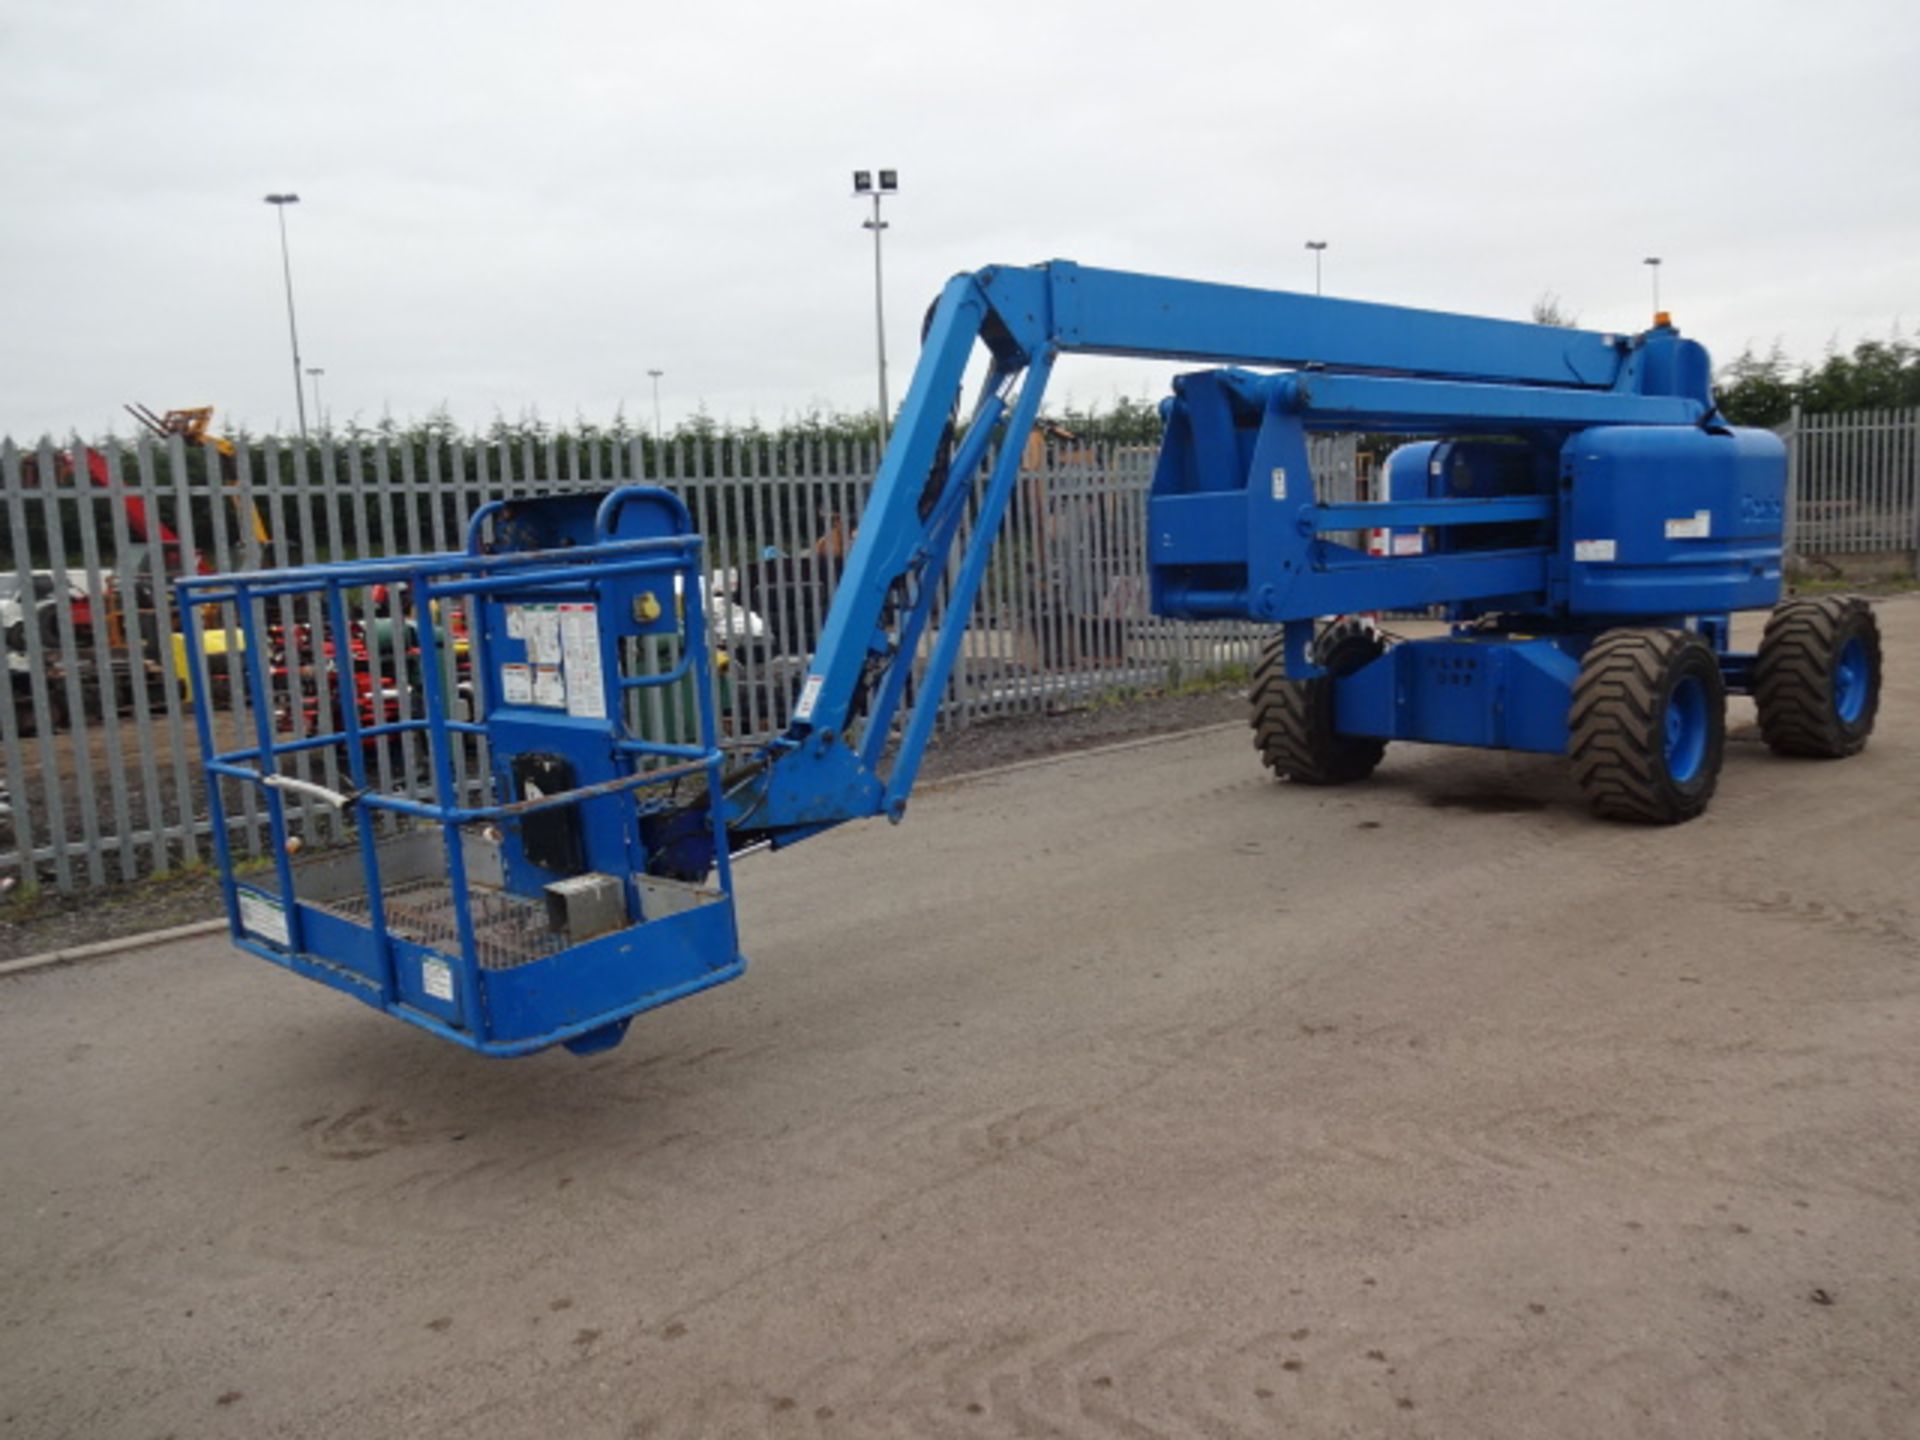 1999 GENIE Z60/34 60' articulated boom lift S/n: 22055 with fly jib (RDL)